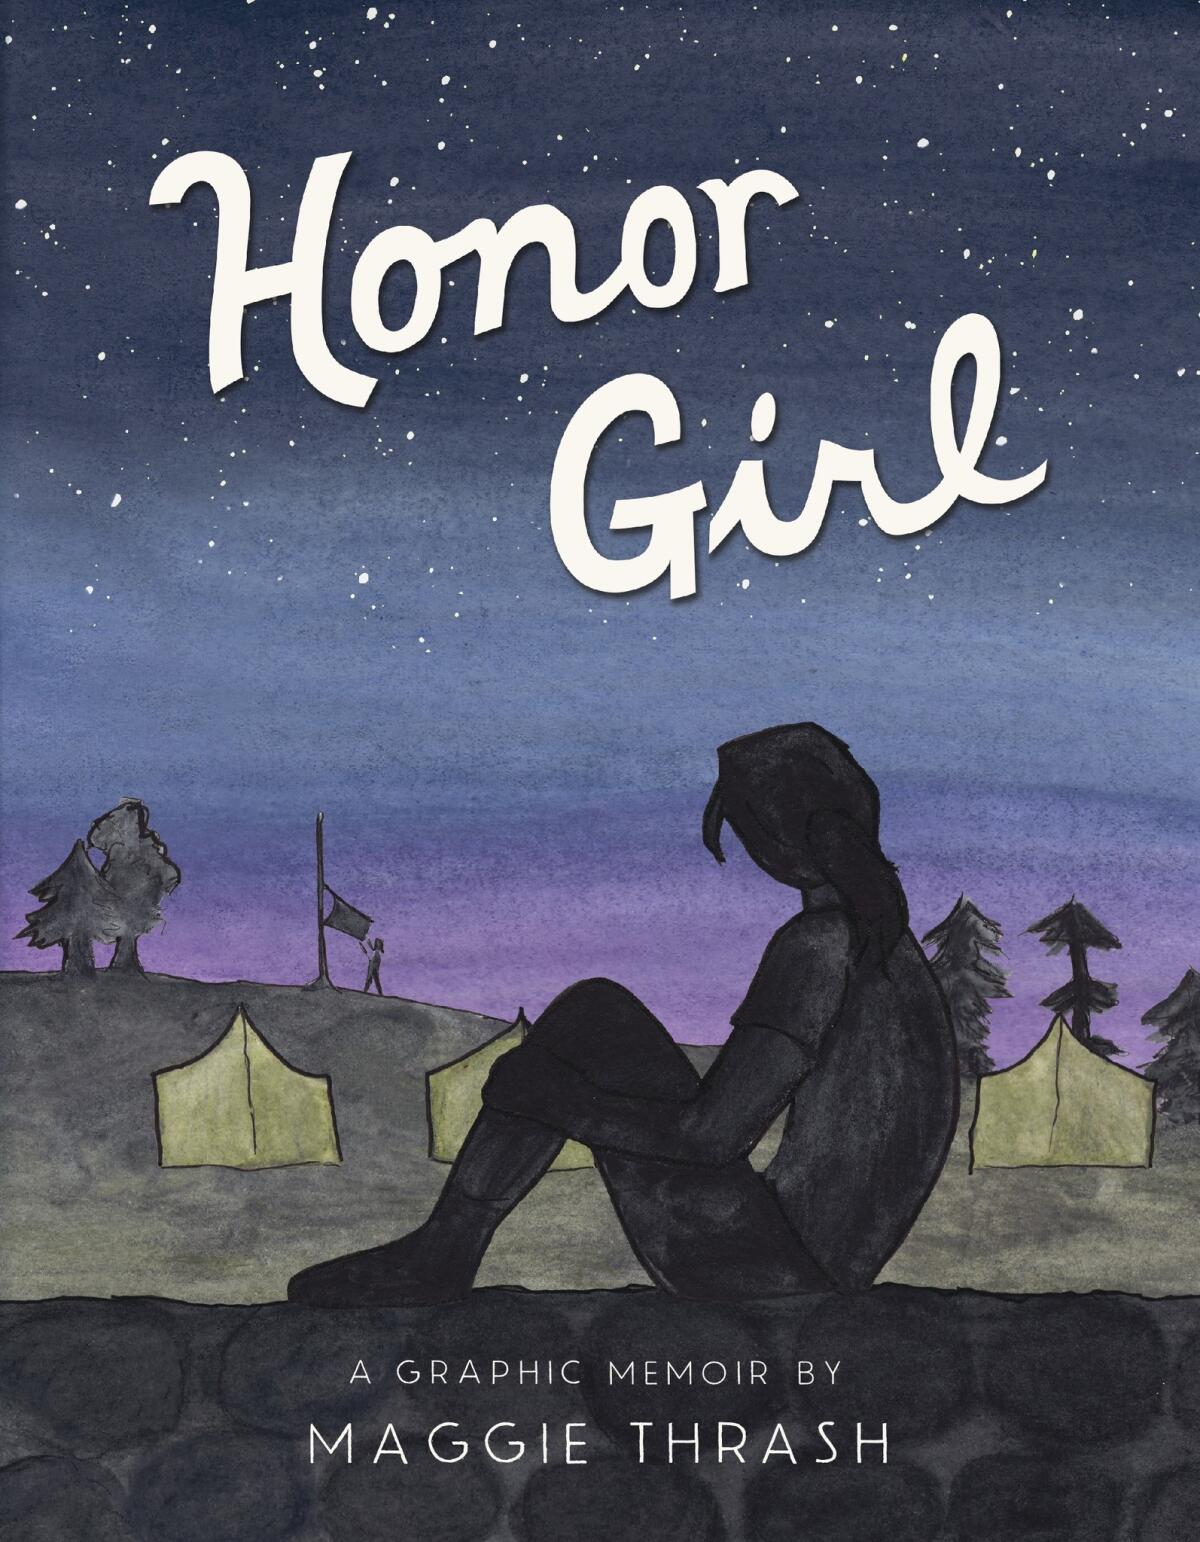 "Honor Girl" by Maggie Thrash